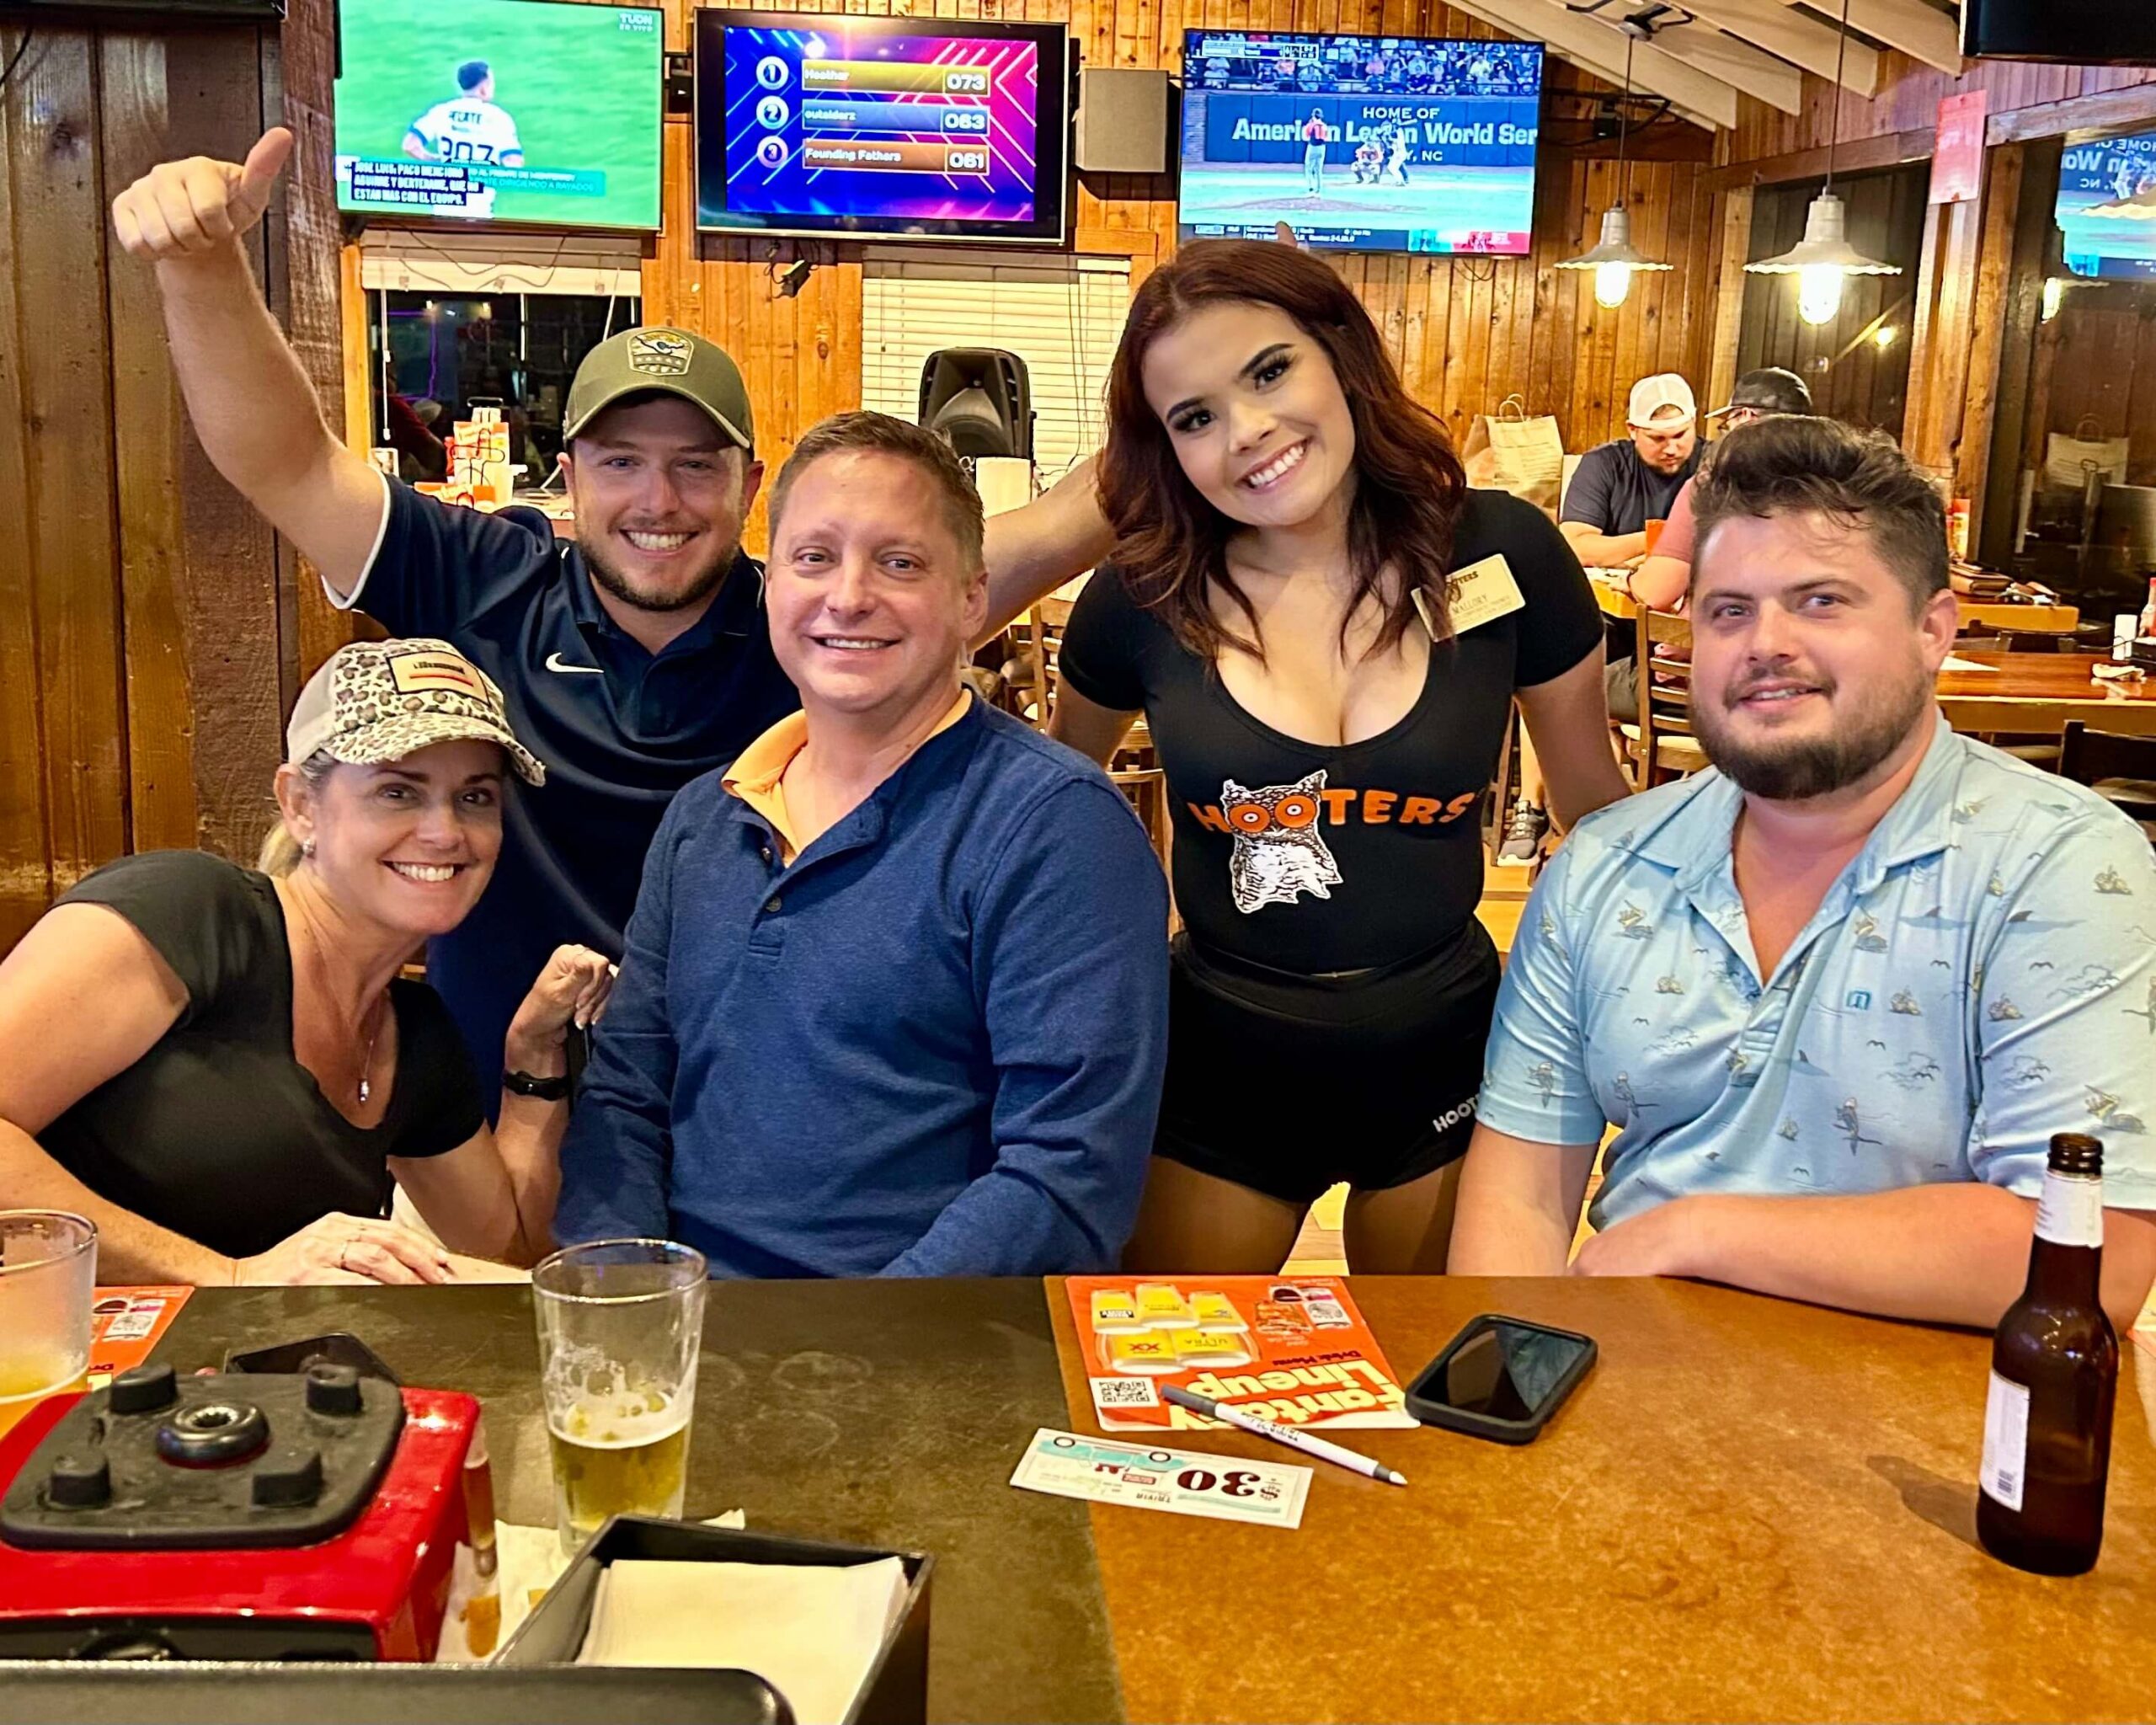 Hooters Jacksonville FL trivia night 32257: five adults at a bar smiling including a Hooters waitress with two draft beers and a bottle of beer on the bar